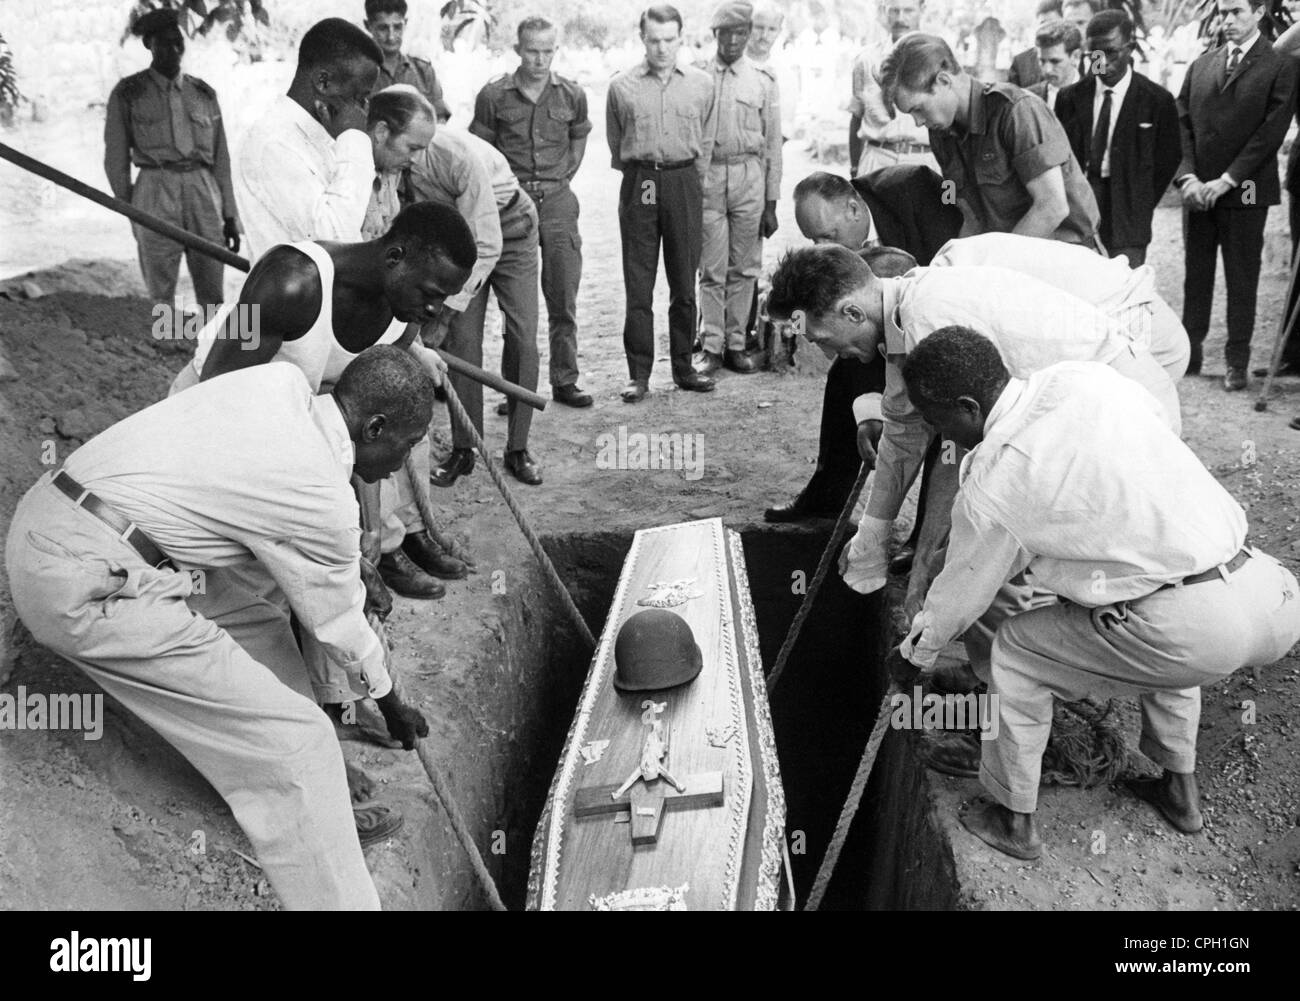 geography/travel, Congo, events, Simba uprising 1964 - 1965, funeral of the killed mercenary Ernest Young from Rhodesia, Leopoldville, 6.10.1964, mercenaries, Democratic Republic of the Congo, Congo Crisis, Civil War, military, Africa, 20th century, historic, historical, 1960s, people, Additional-Rights-Clearences-Not Available Stock Photo